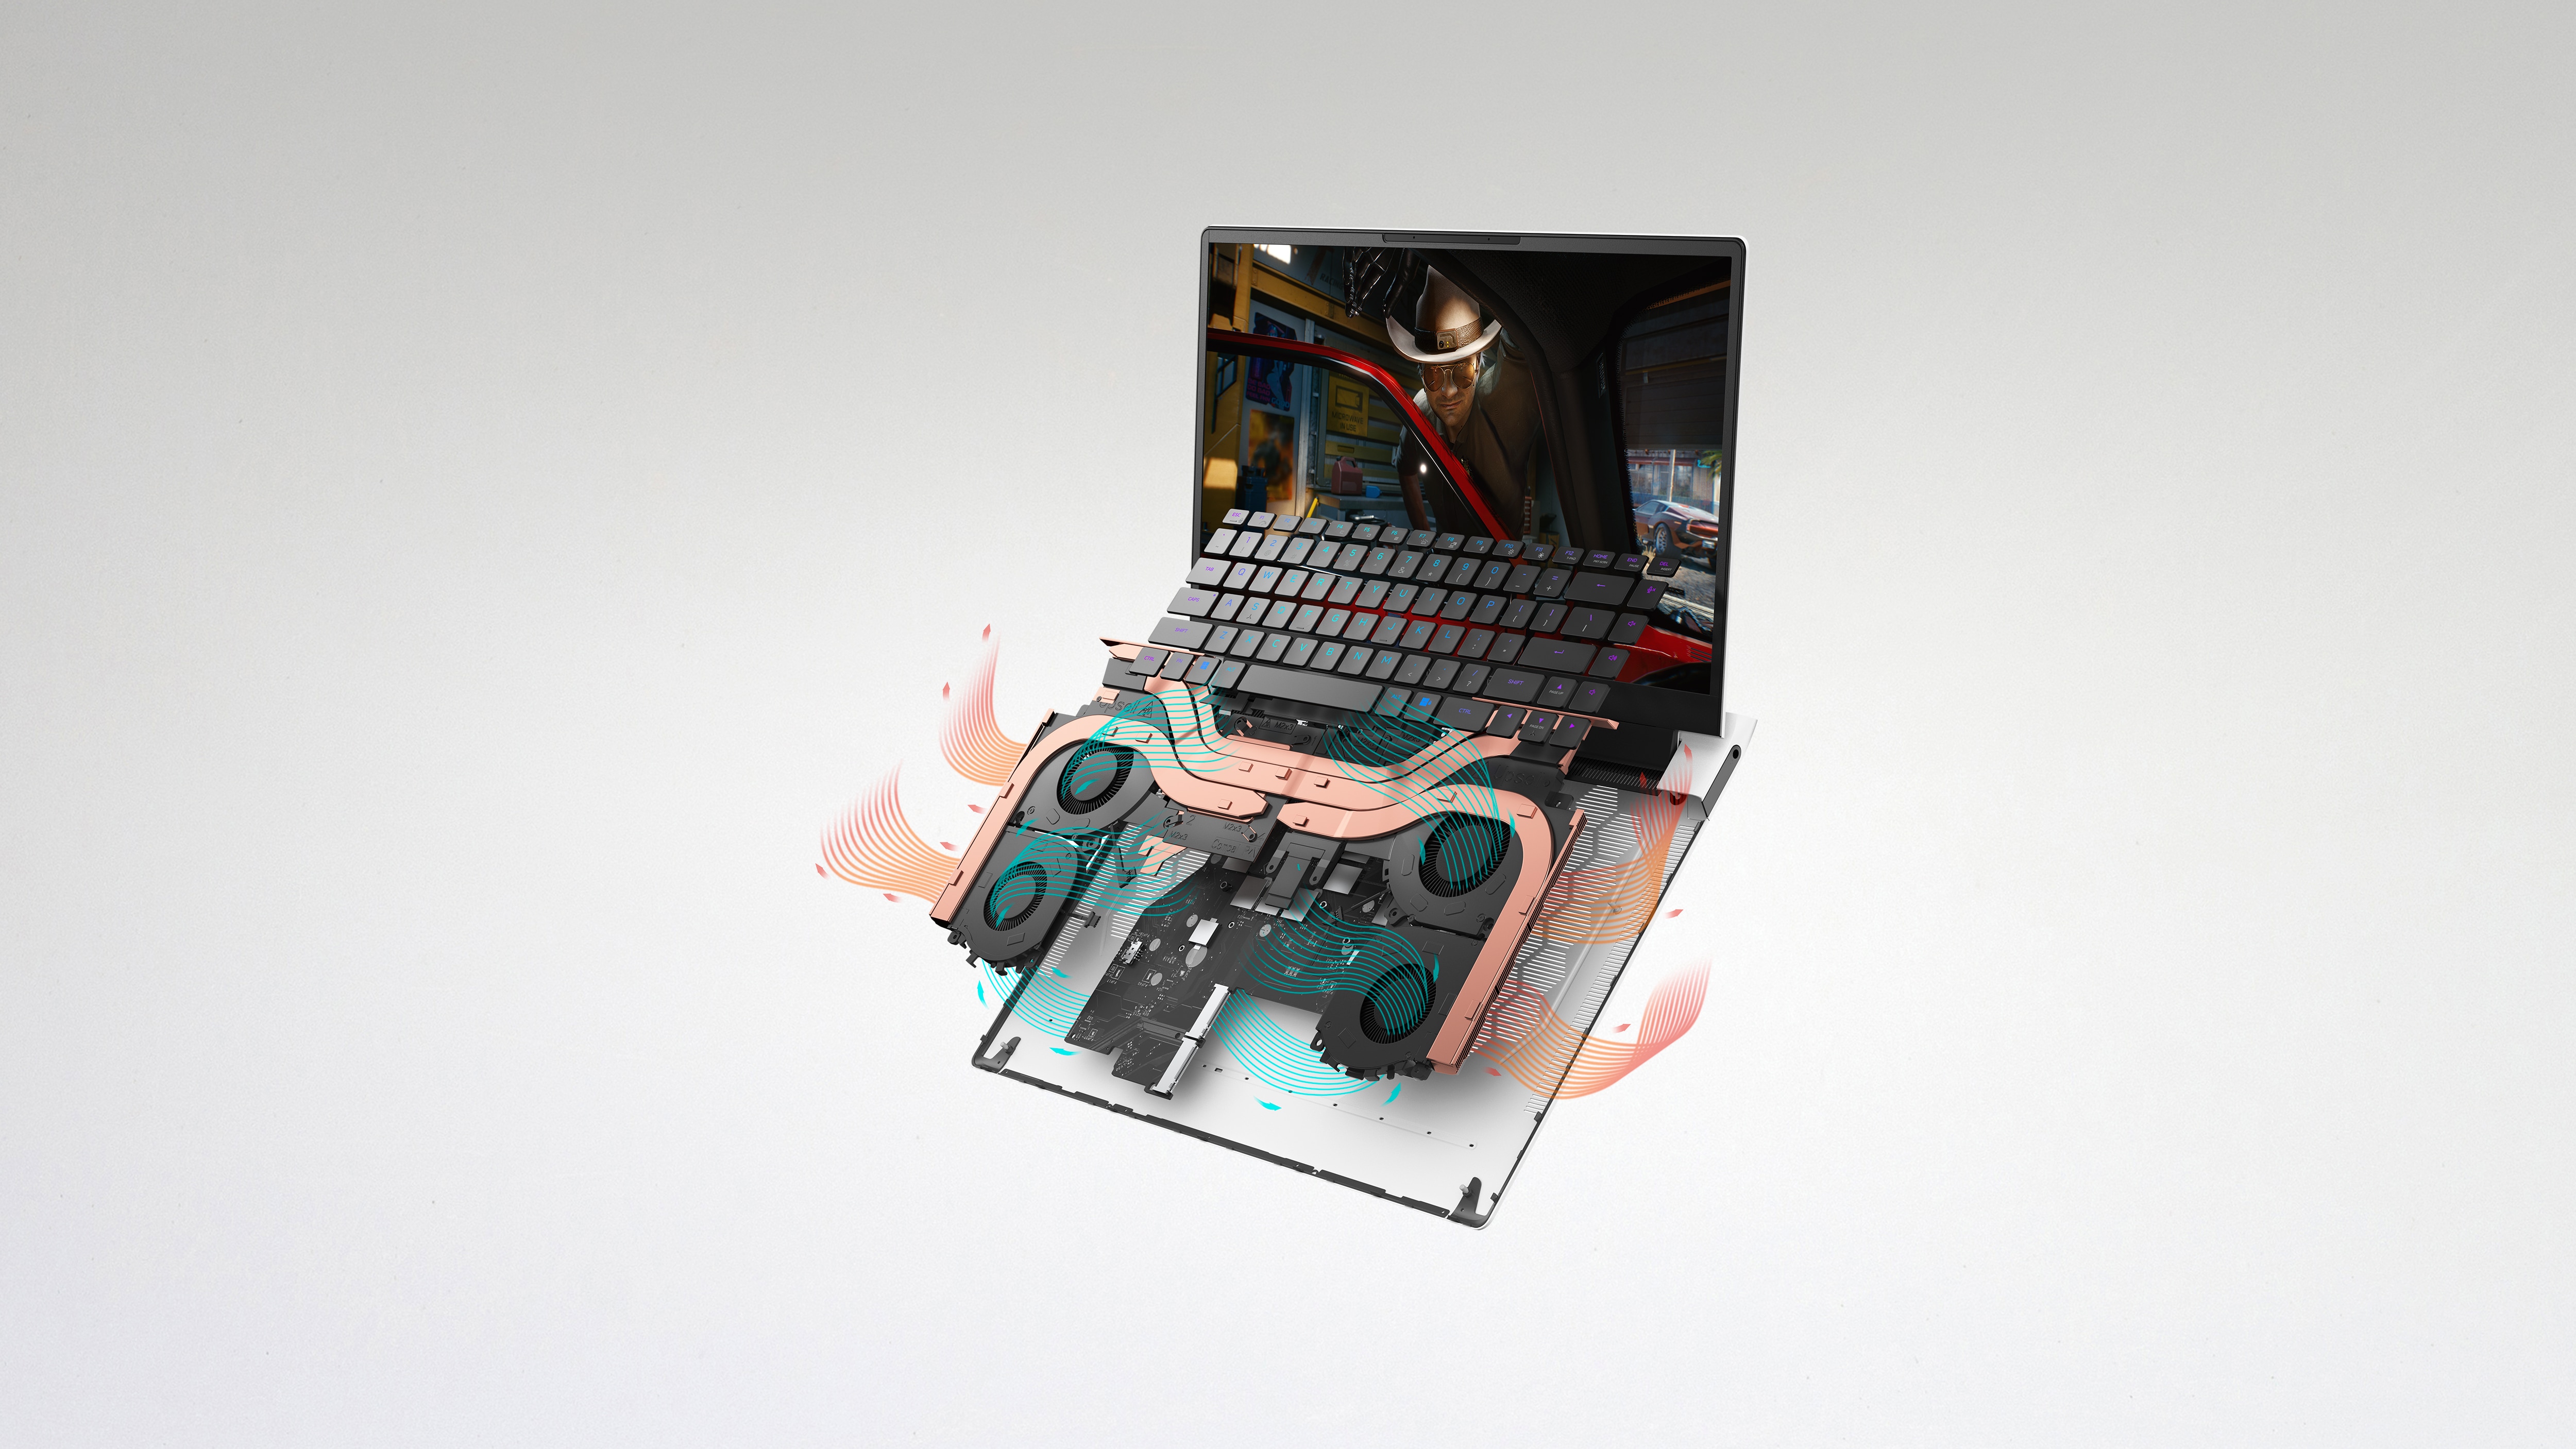 Picture of Dell Alienware x15 R2 Gaming Laptop with disassembled keyboard in detail, showing the latest cooling technology.